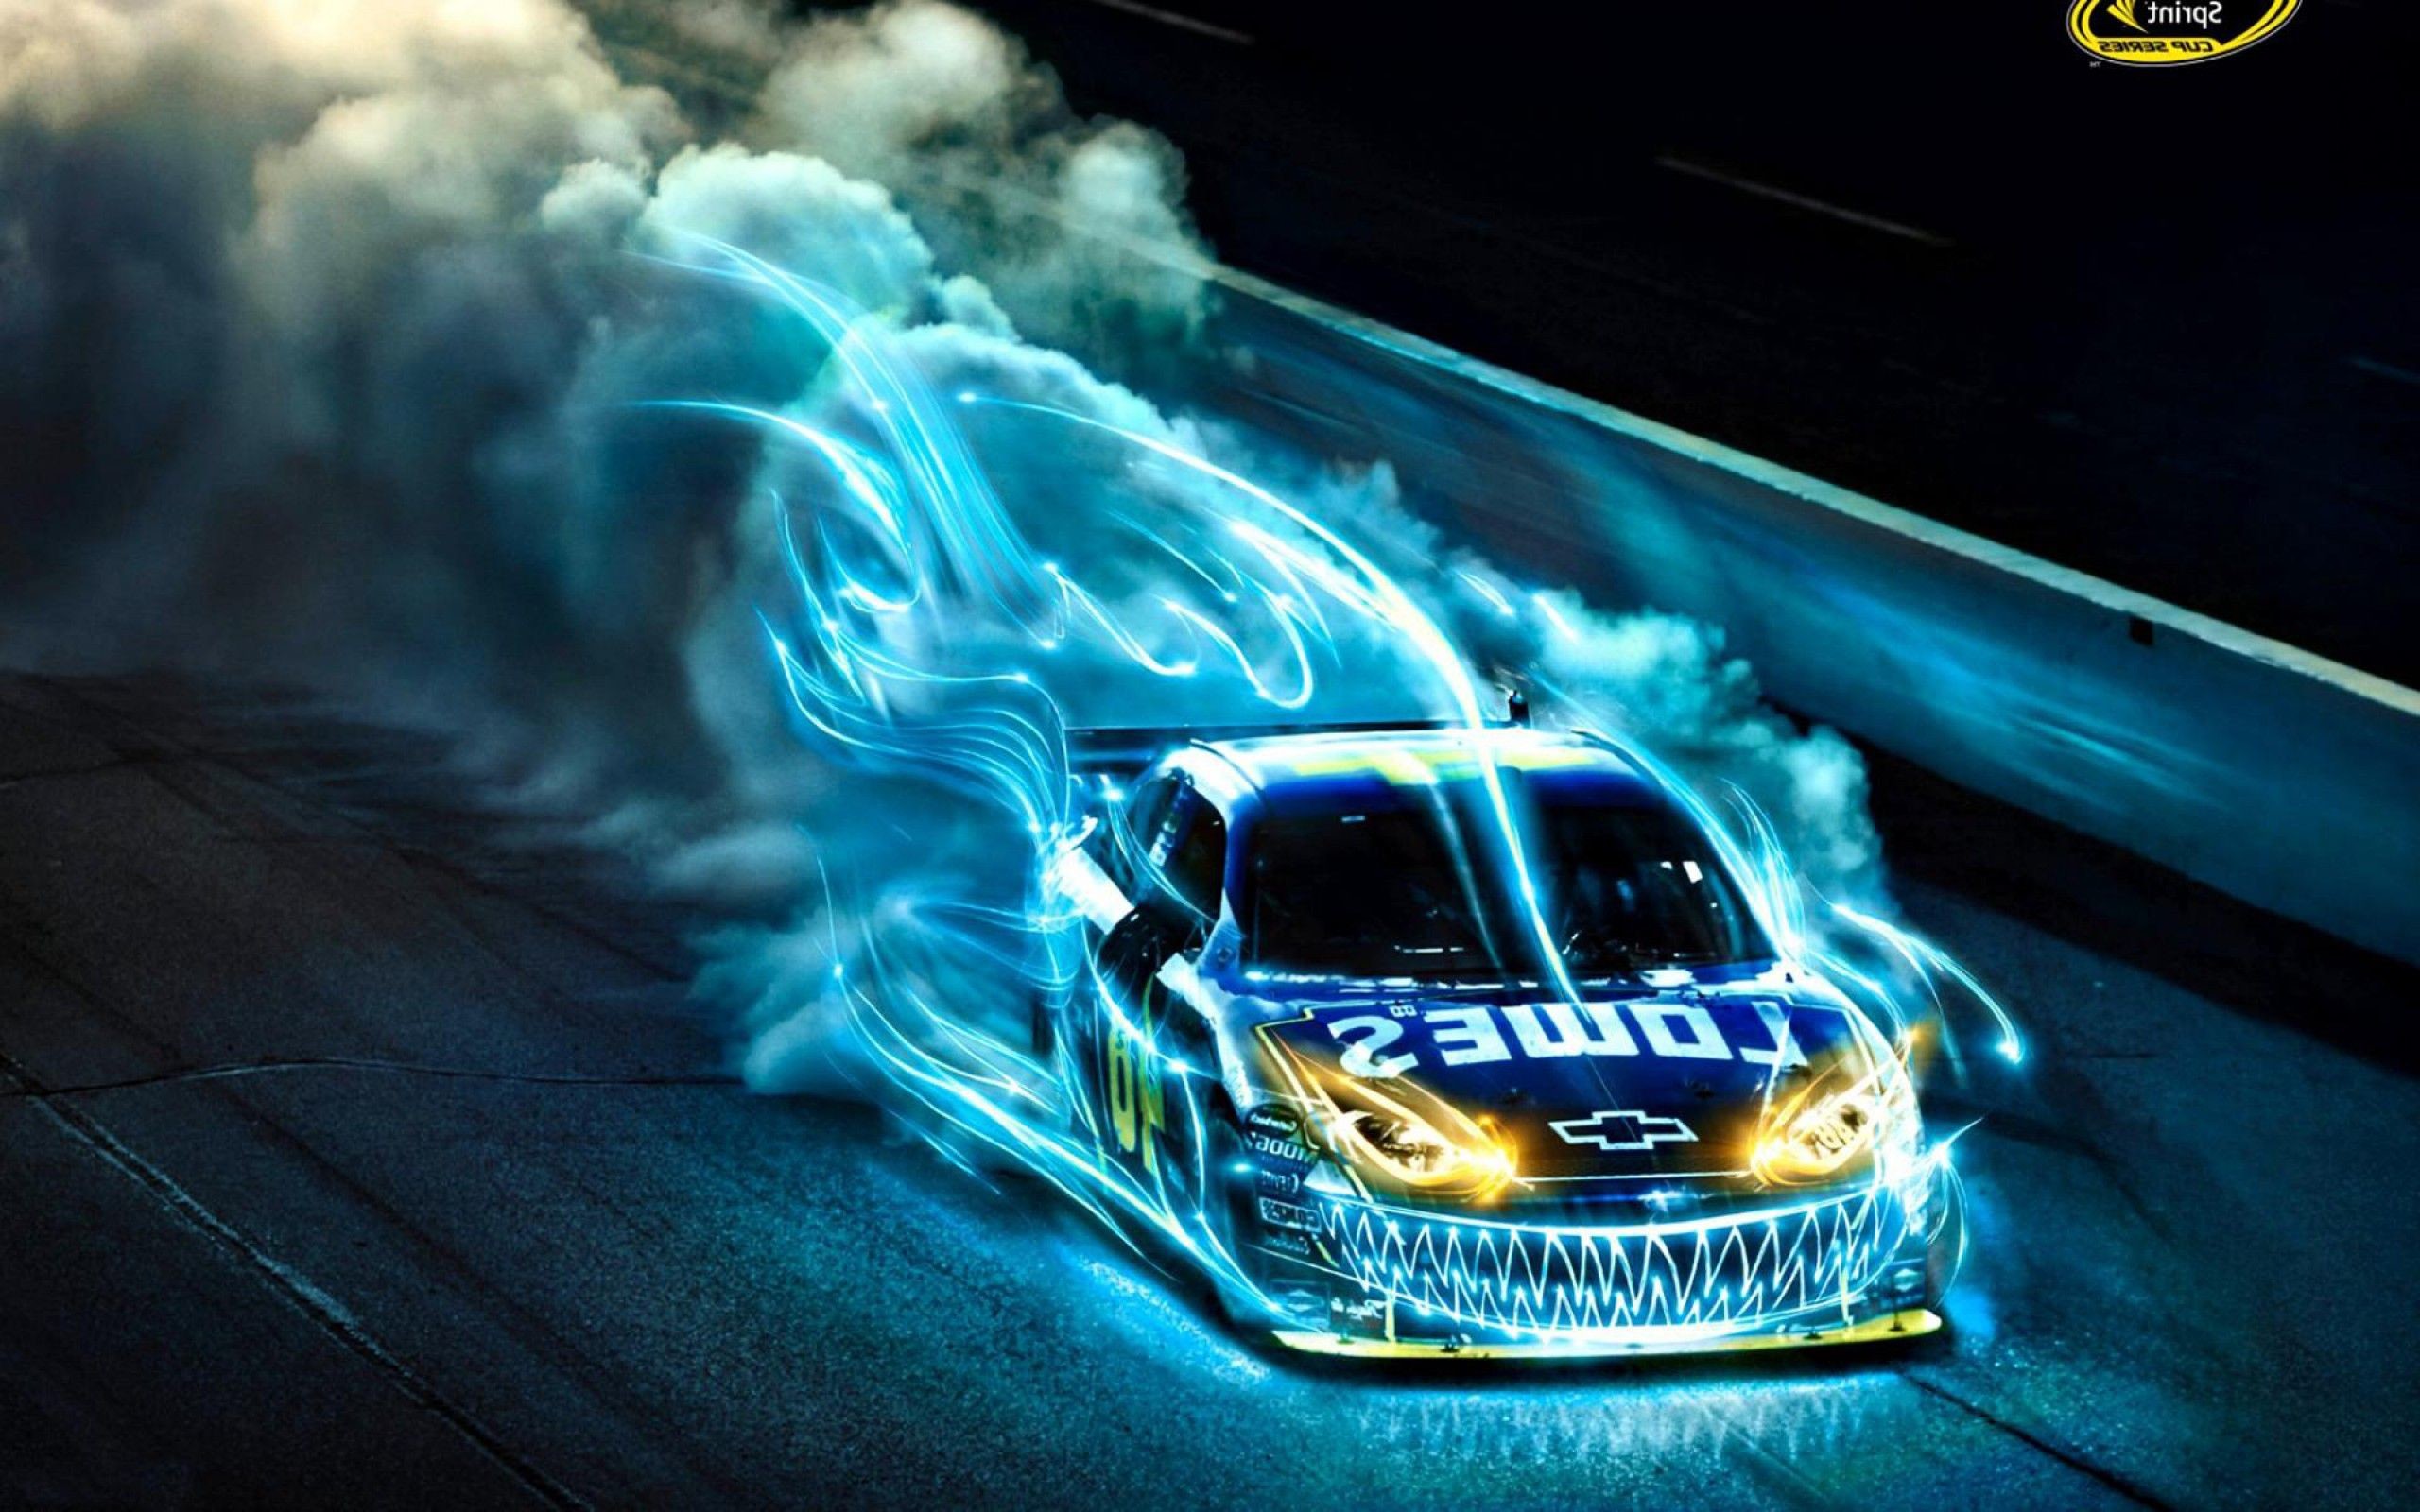 Wallpaper race, smoke, Chevrolet, Camaro, muscle car, Muscle car, Yenko,  drag racing for mobile and desktop, section chevrolet, resolution 2048x1363  - download